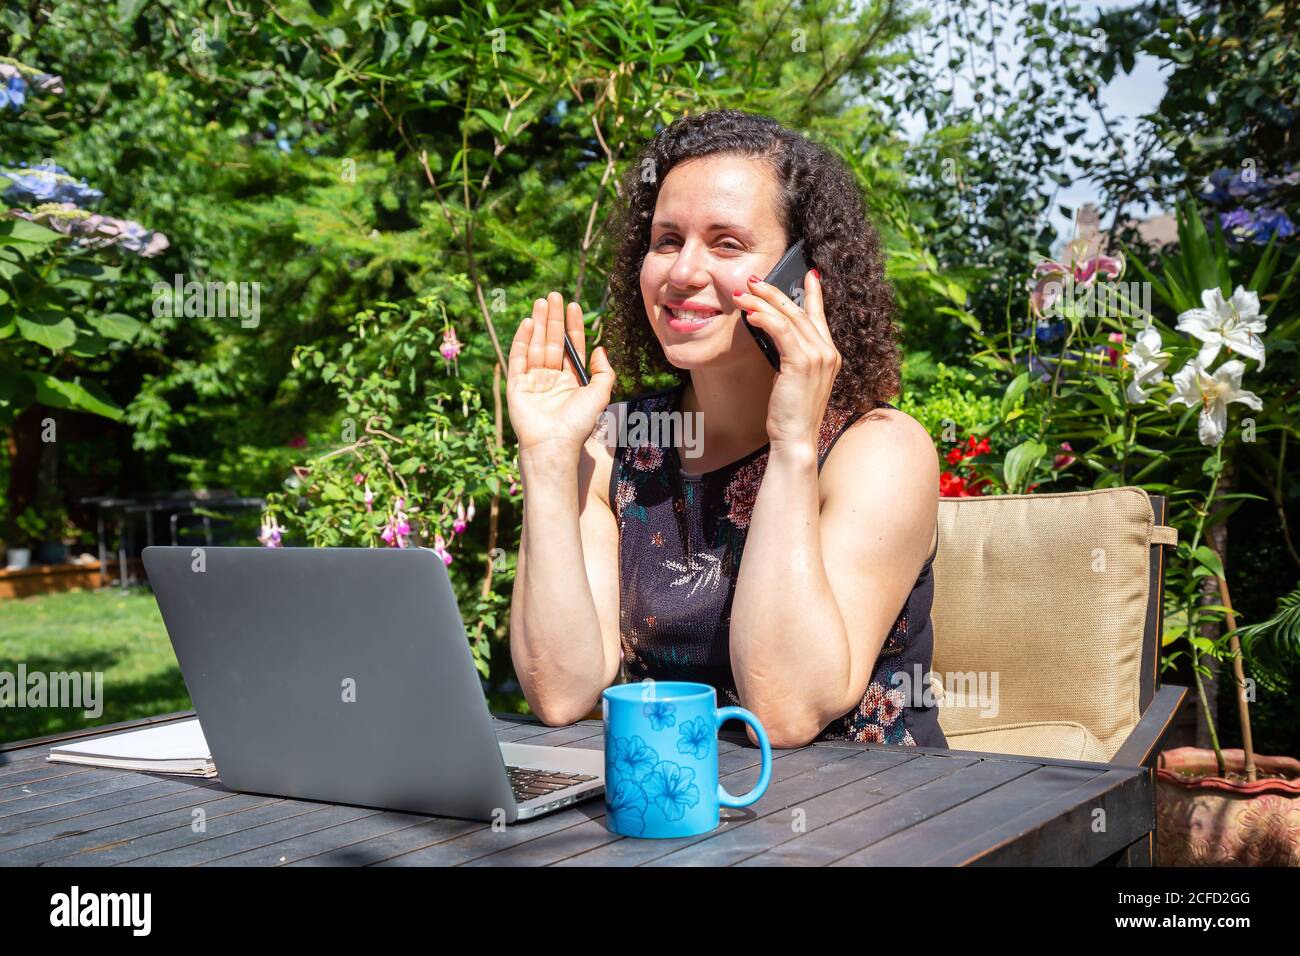 Young Caucasian Woman Working on a Laptop from Home in a Garden. Stock Photo